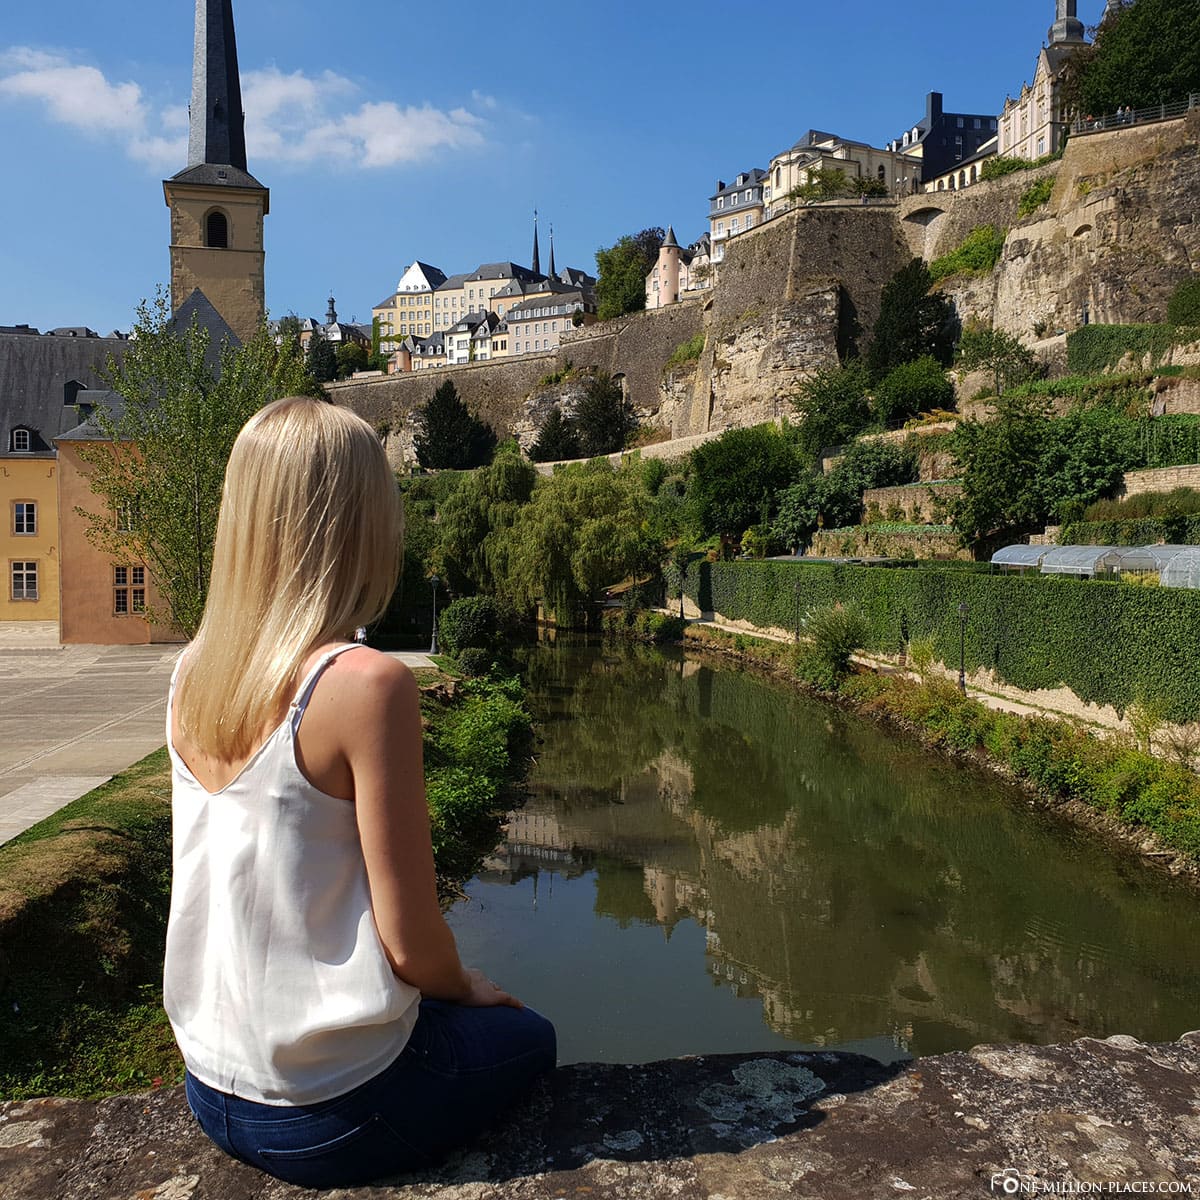 View, Selfie, Reason, Luxembourg, Attractions, Day Trip, City Trip